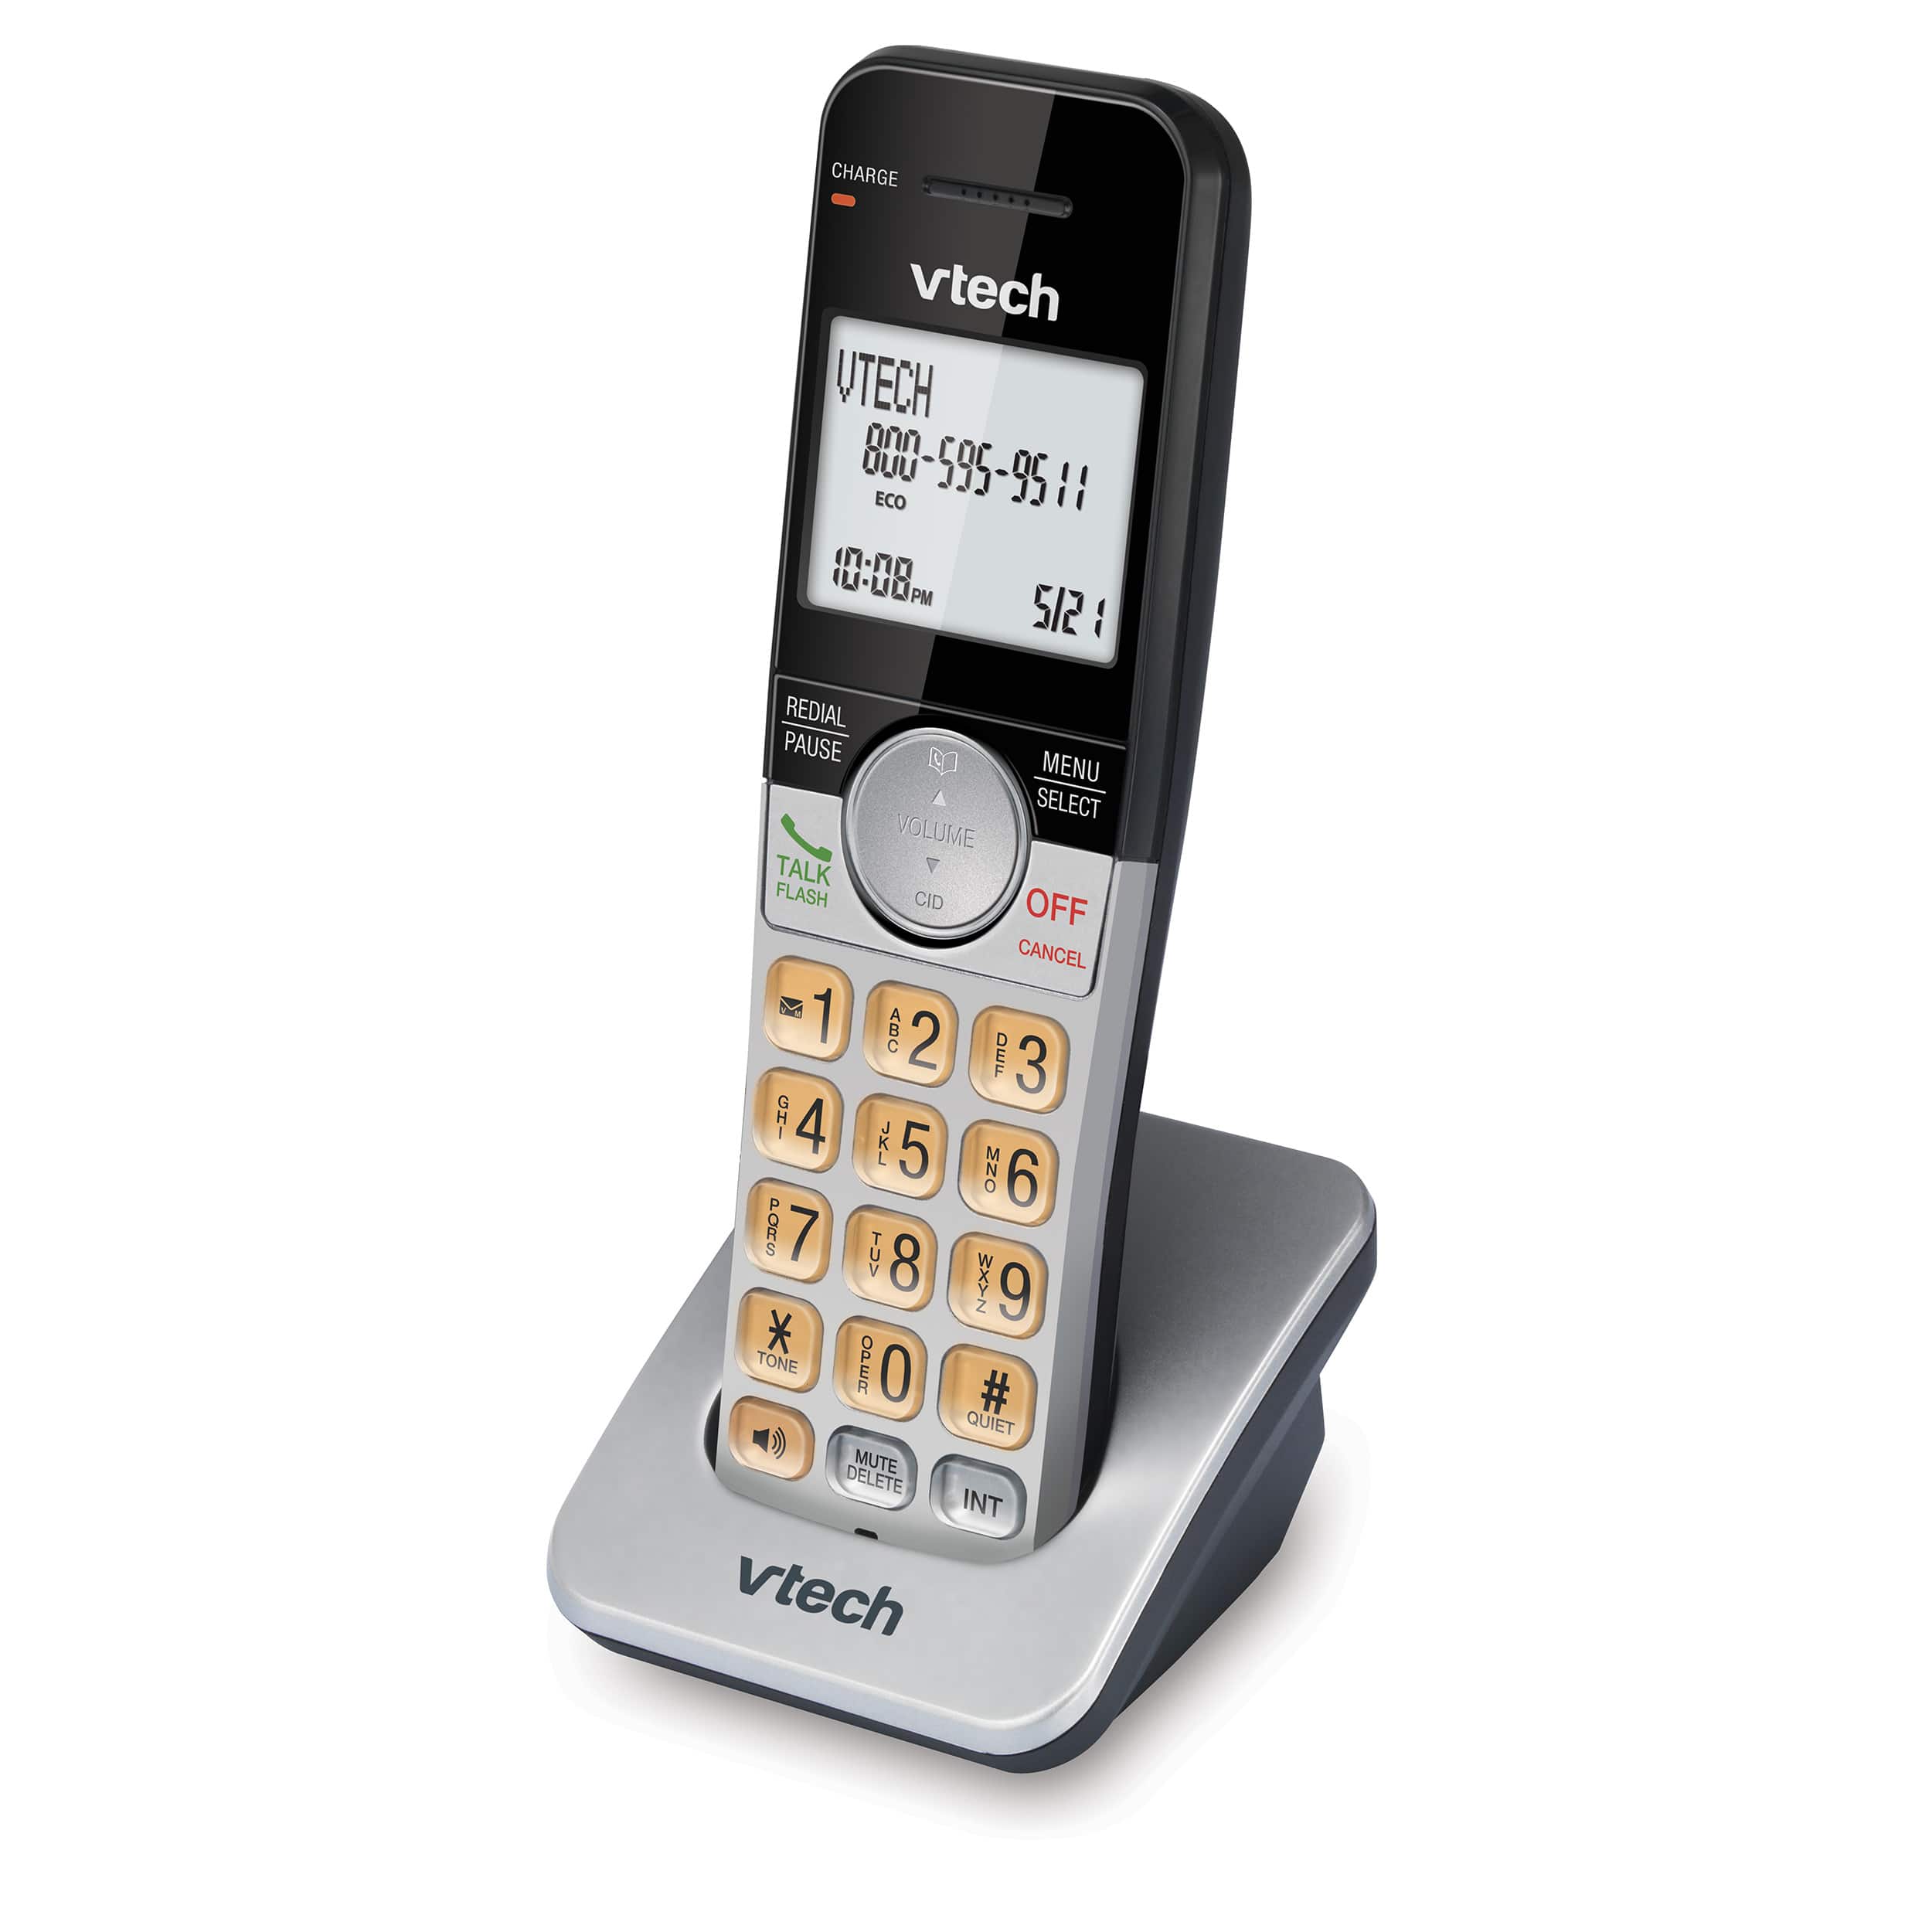 Set up and connect the telephone - VTech CS5249 